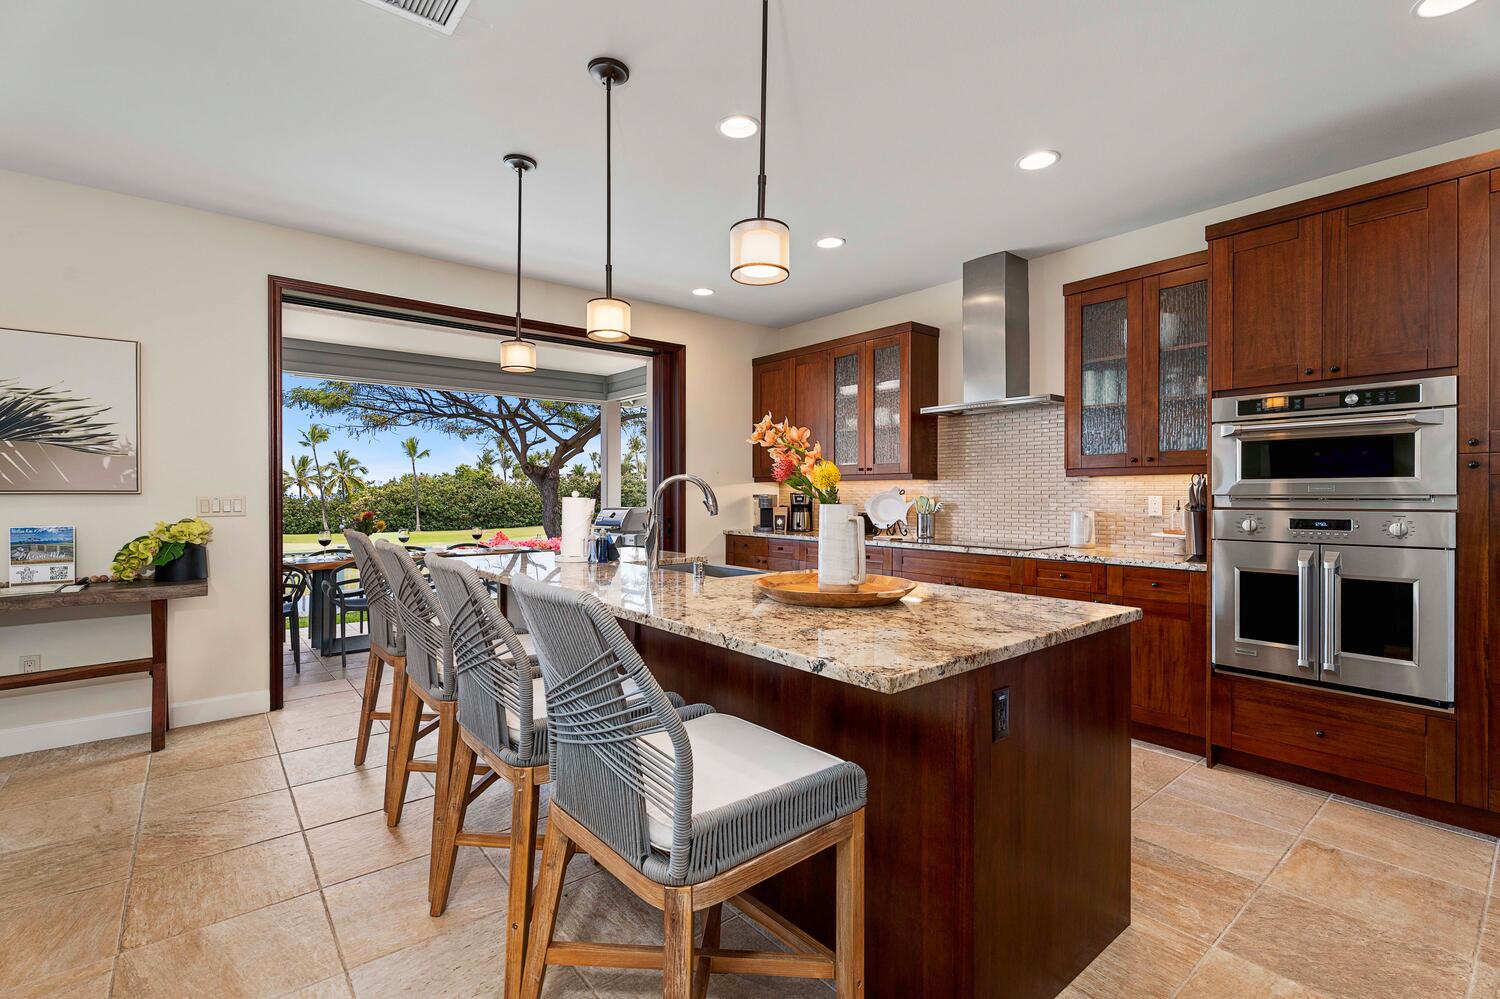 Kailua-Kona Vacation Rentals, Holua Kai #26 - Spacious kitchen with bar seating and an open view to a sunny golf course.